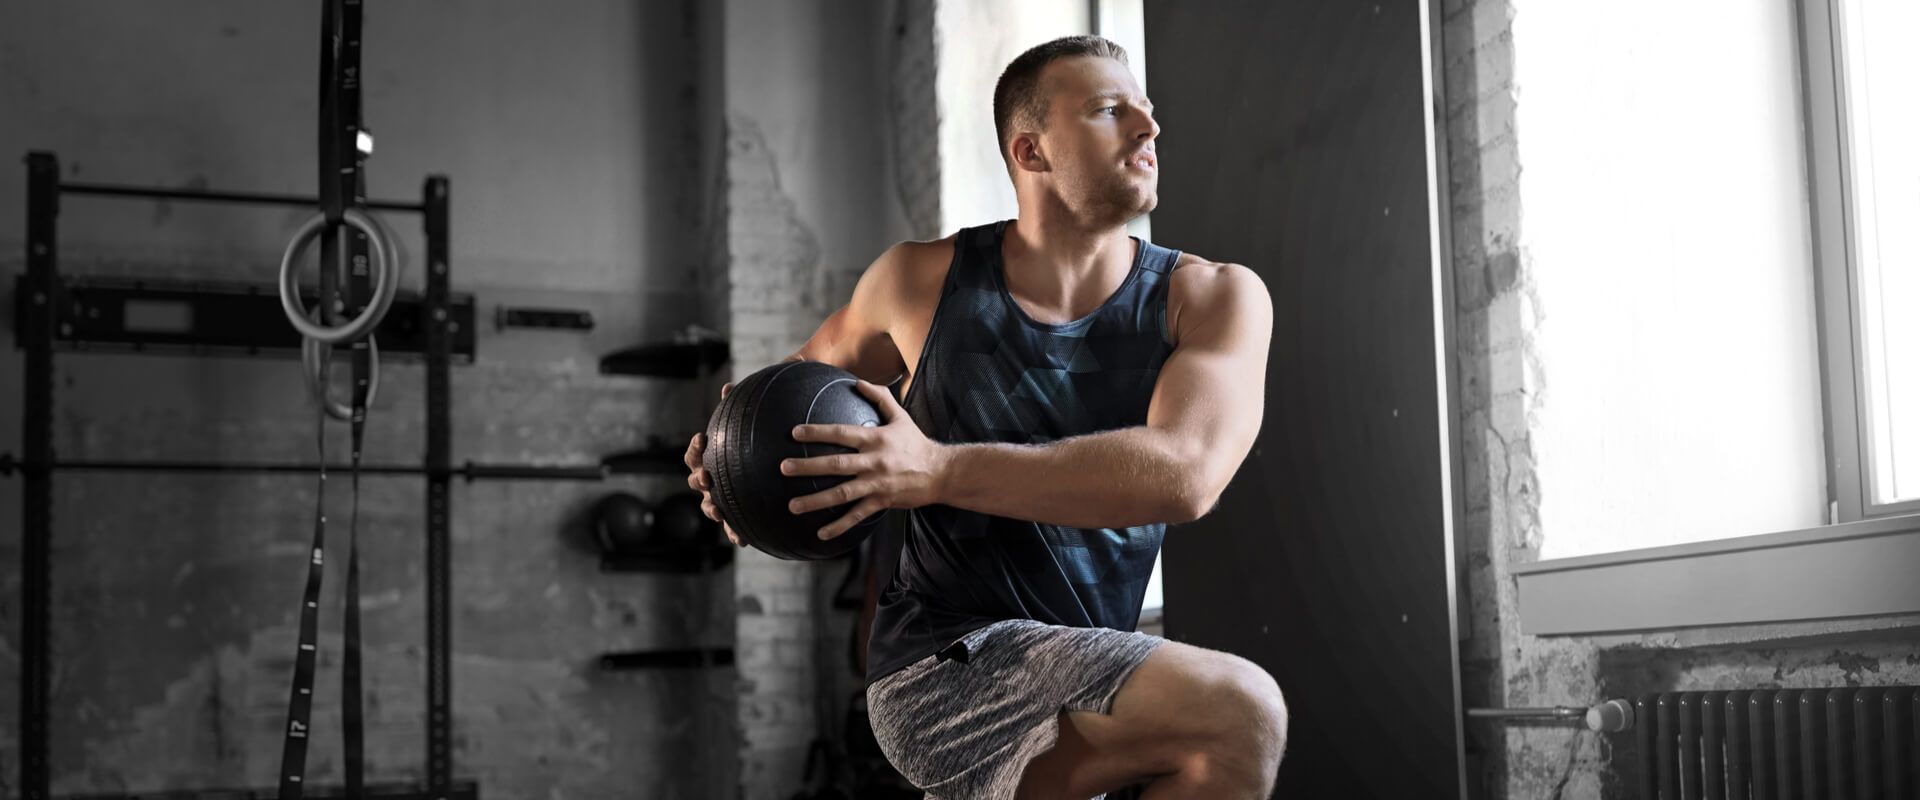 young man exercising with medicine ball in gym